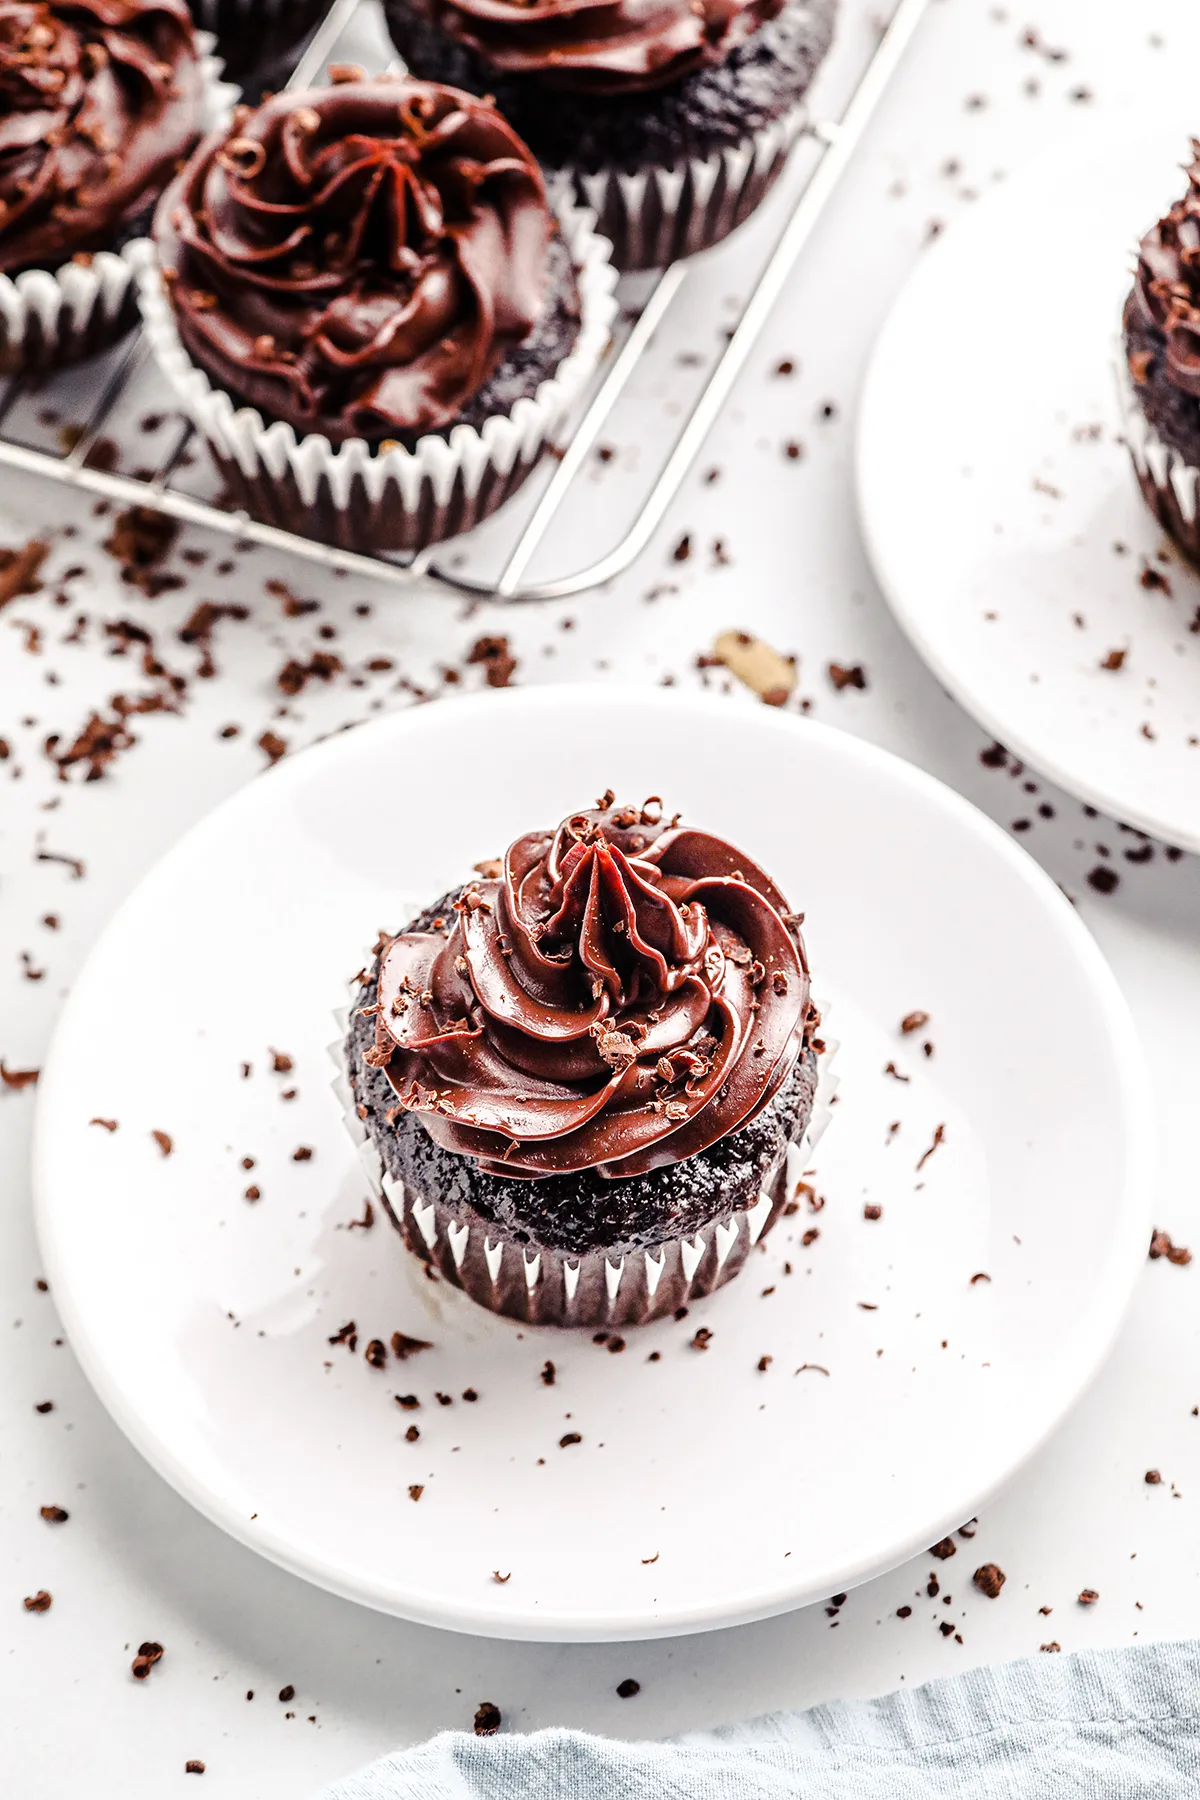 chocolate frosted cupcake being served on a small white plate and sprinkled with small chocolate shavings